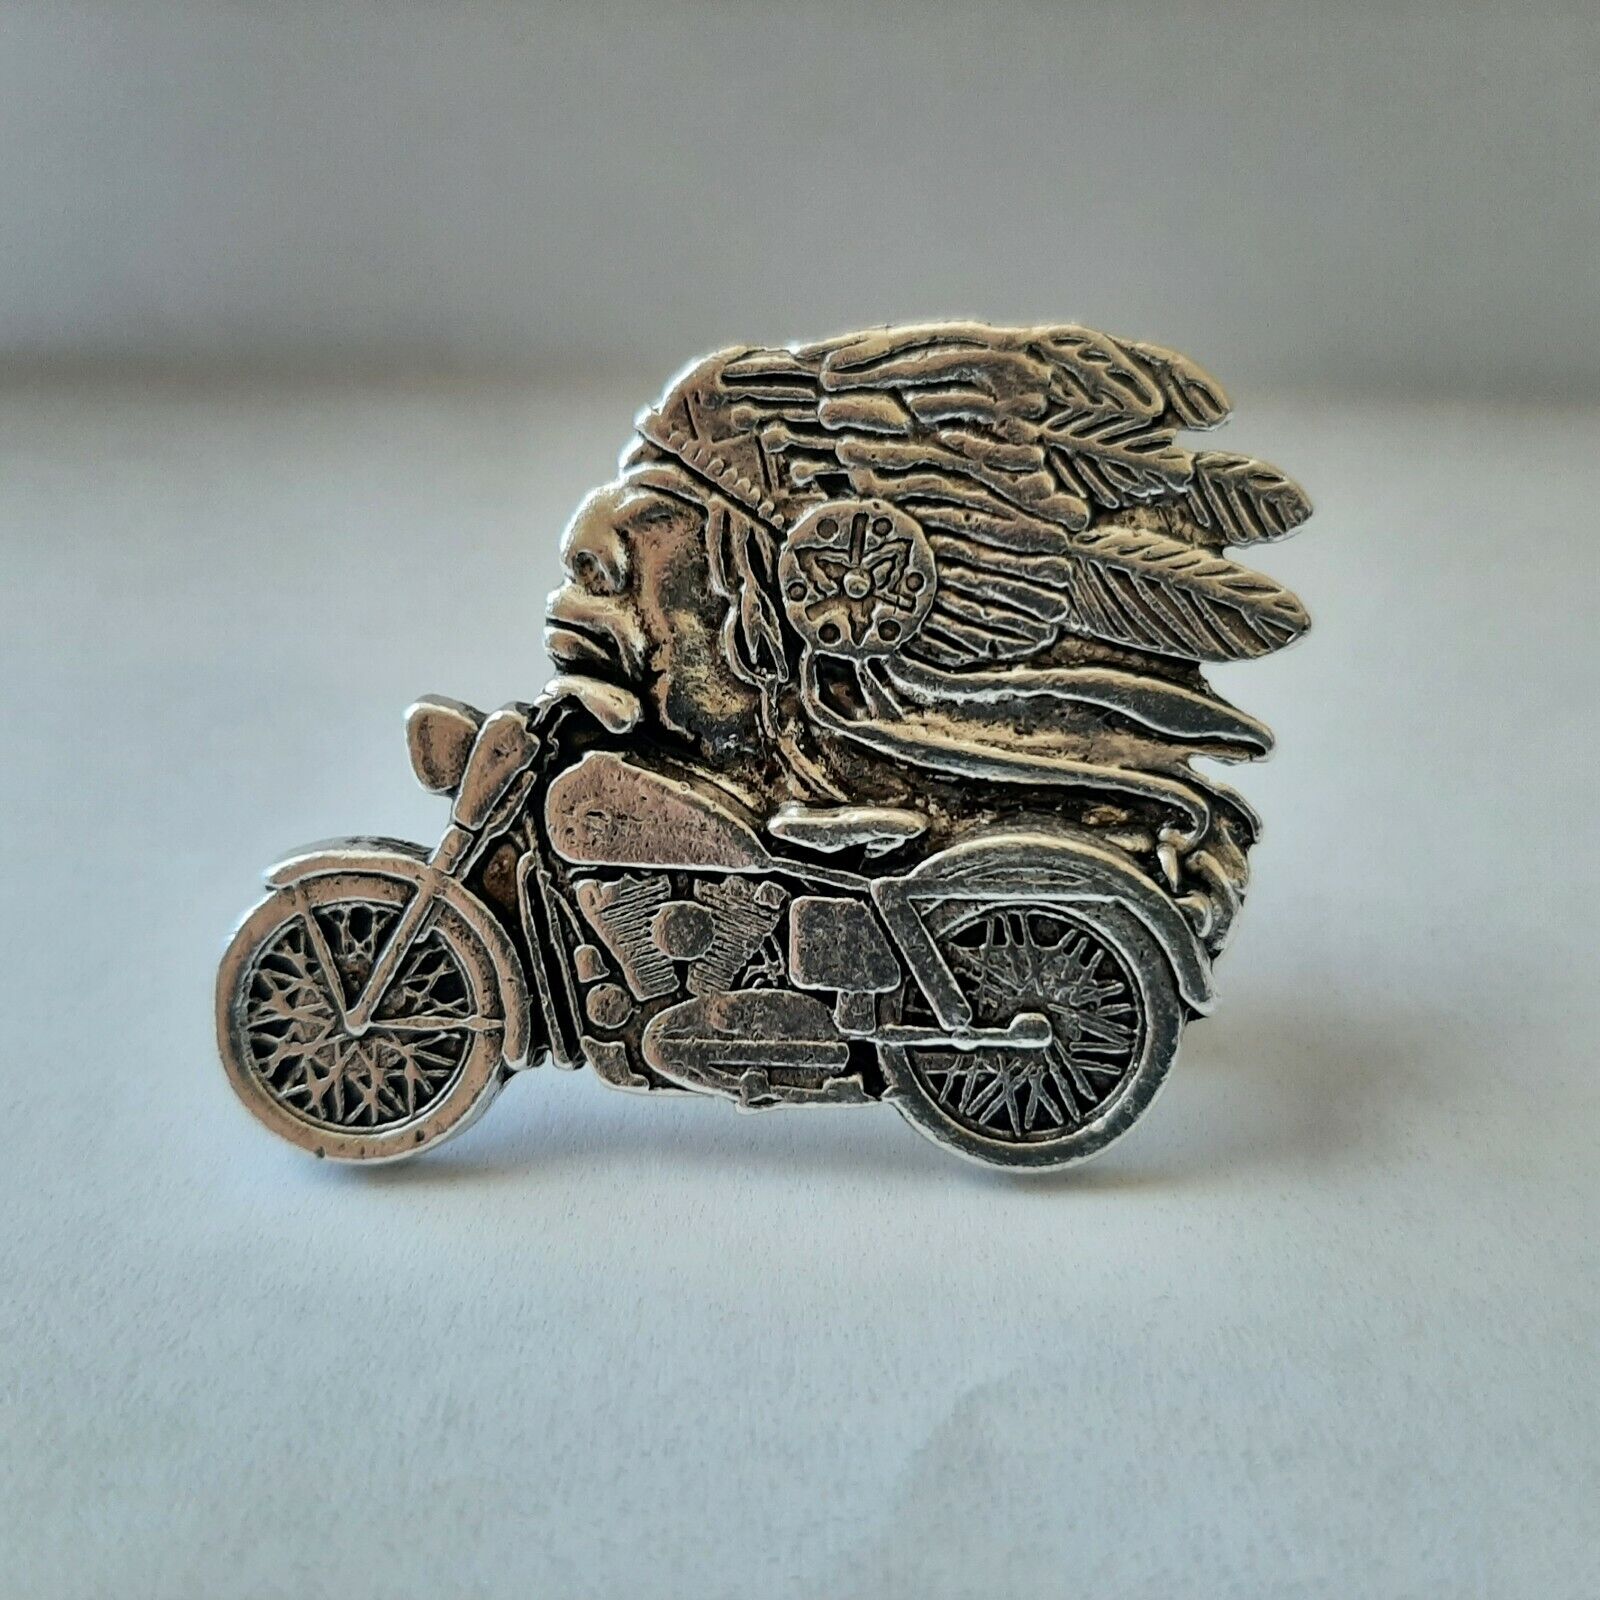  SILVER PLATED Vintage  INDIAN MOTORCYCLE pin